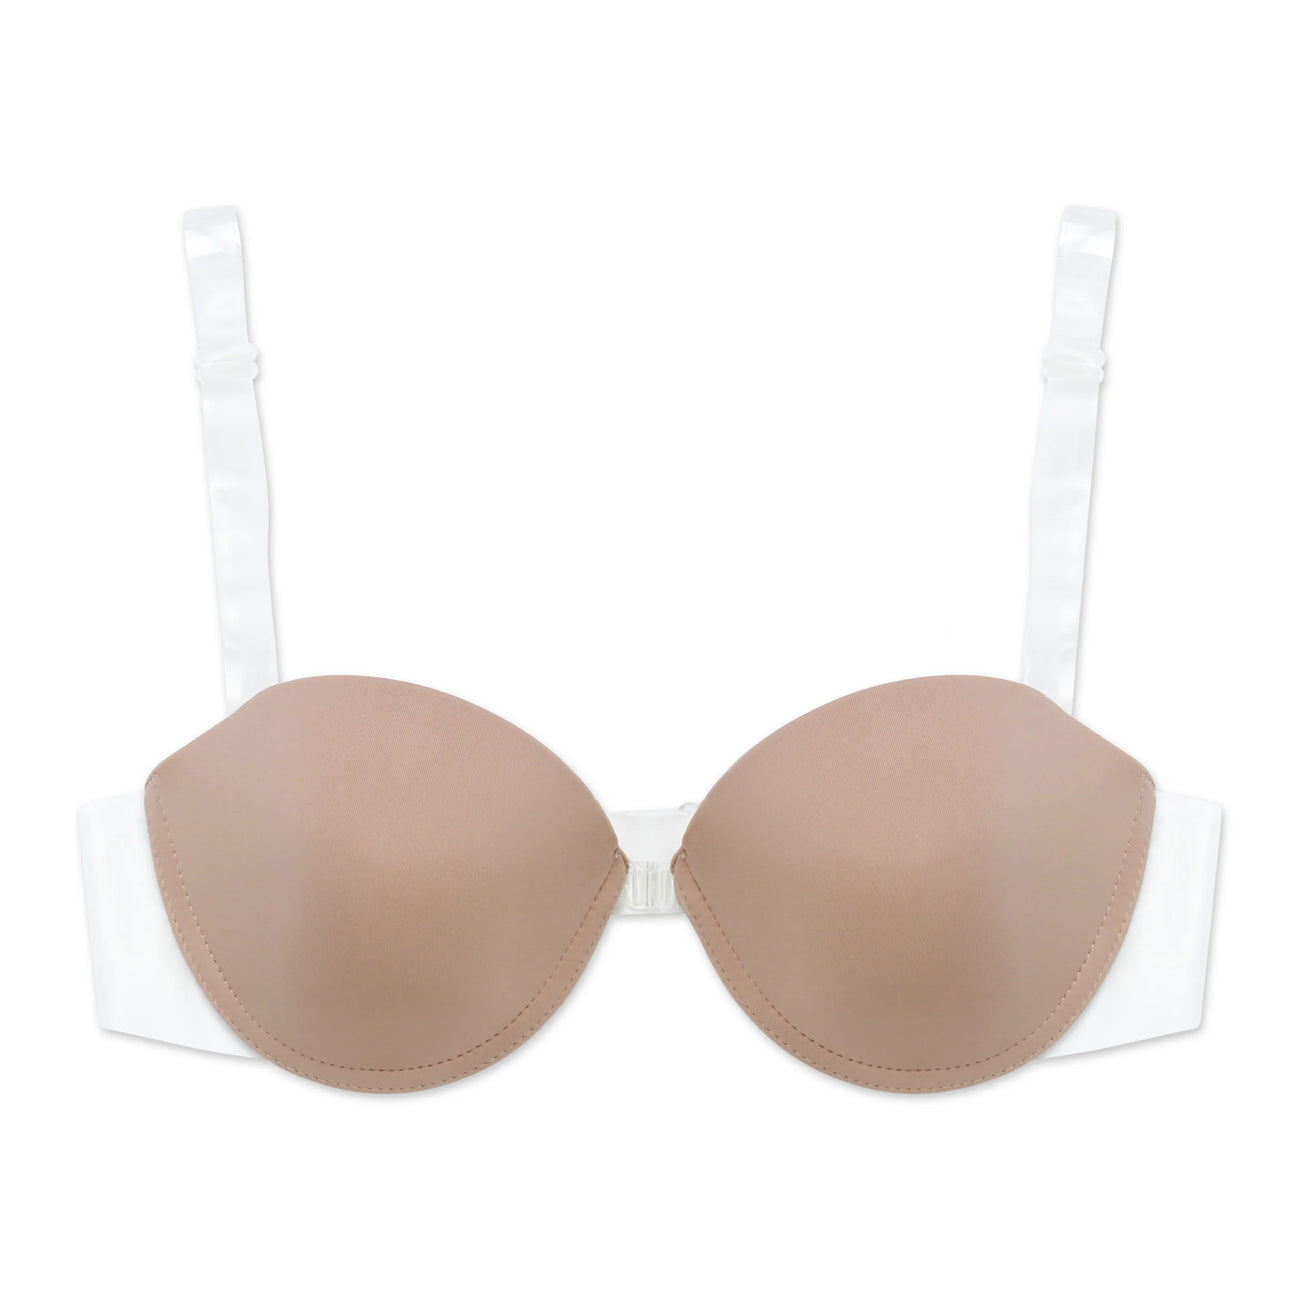 Backless clear straps bras - strapless bras with clear back: Lormar R6461